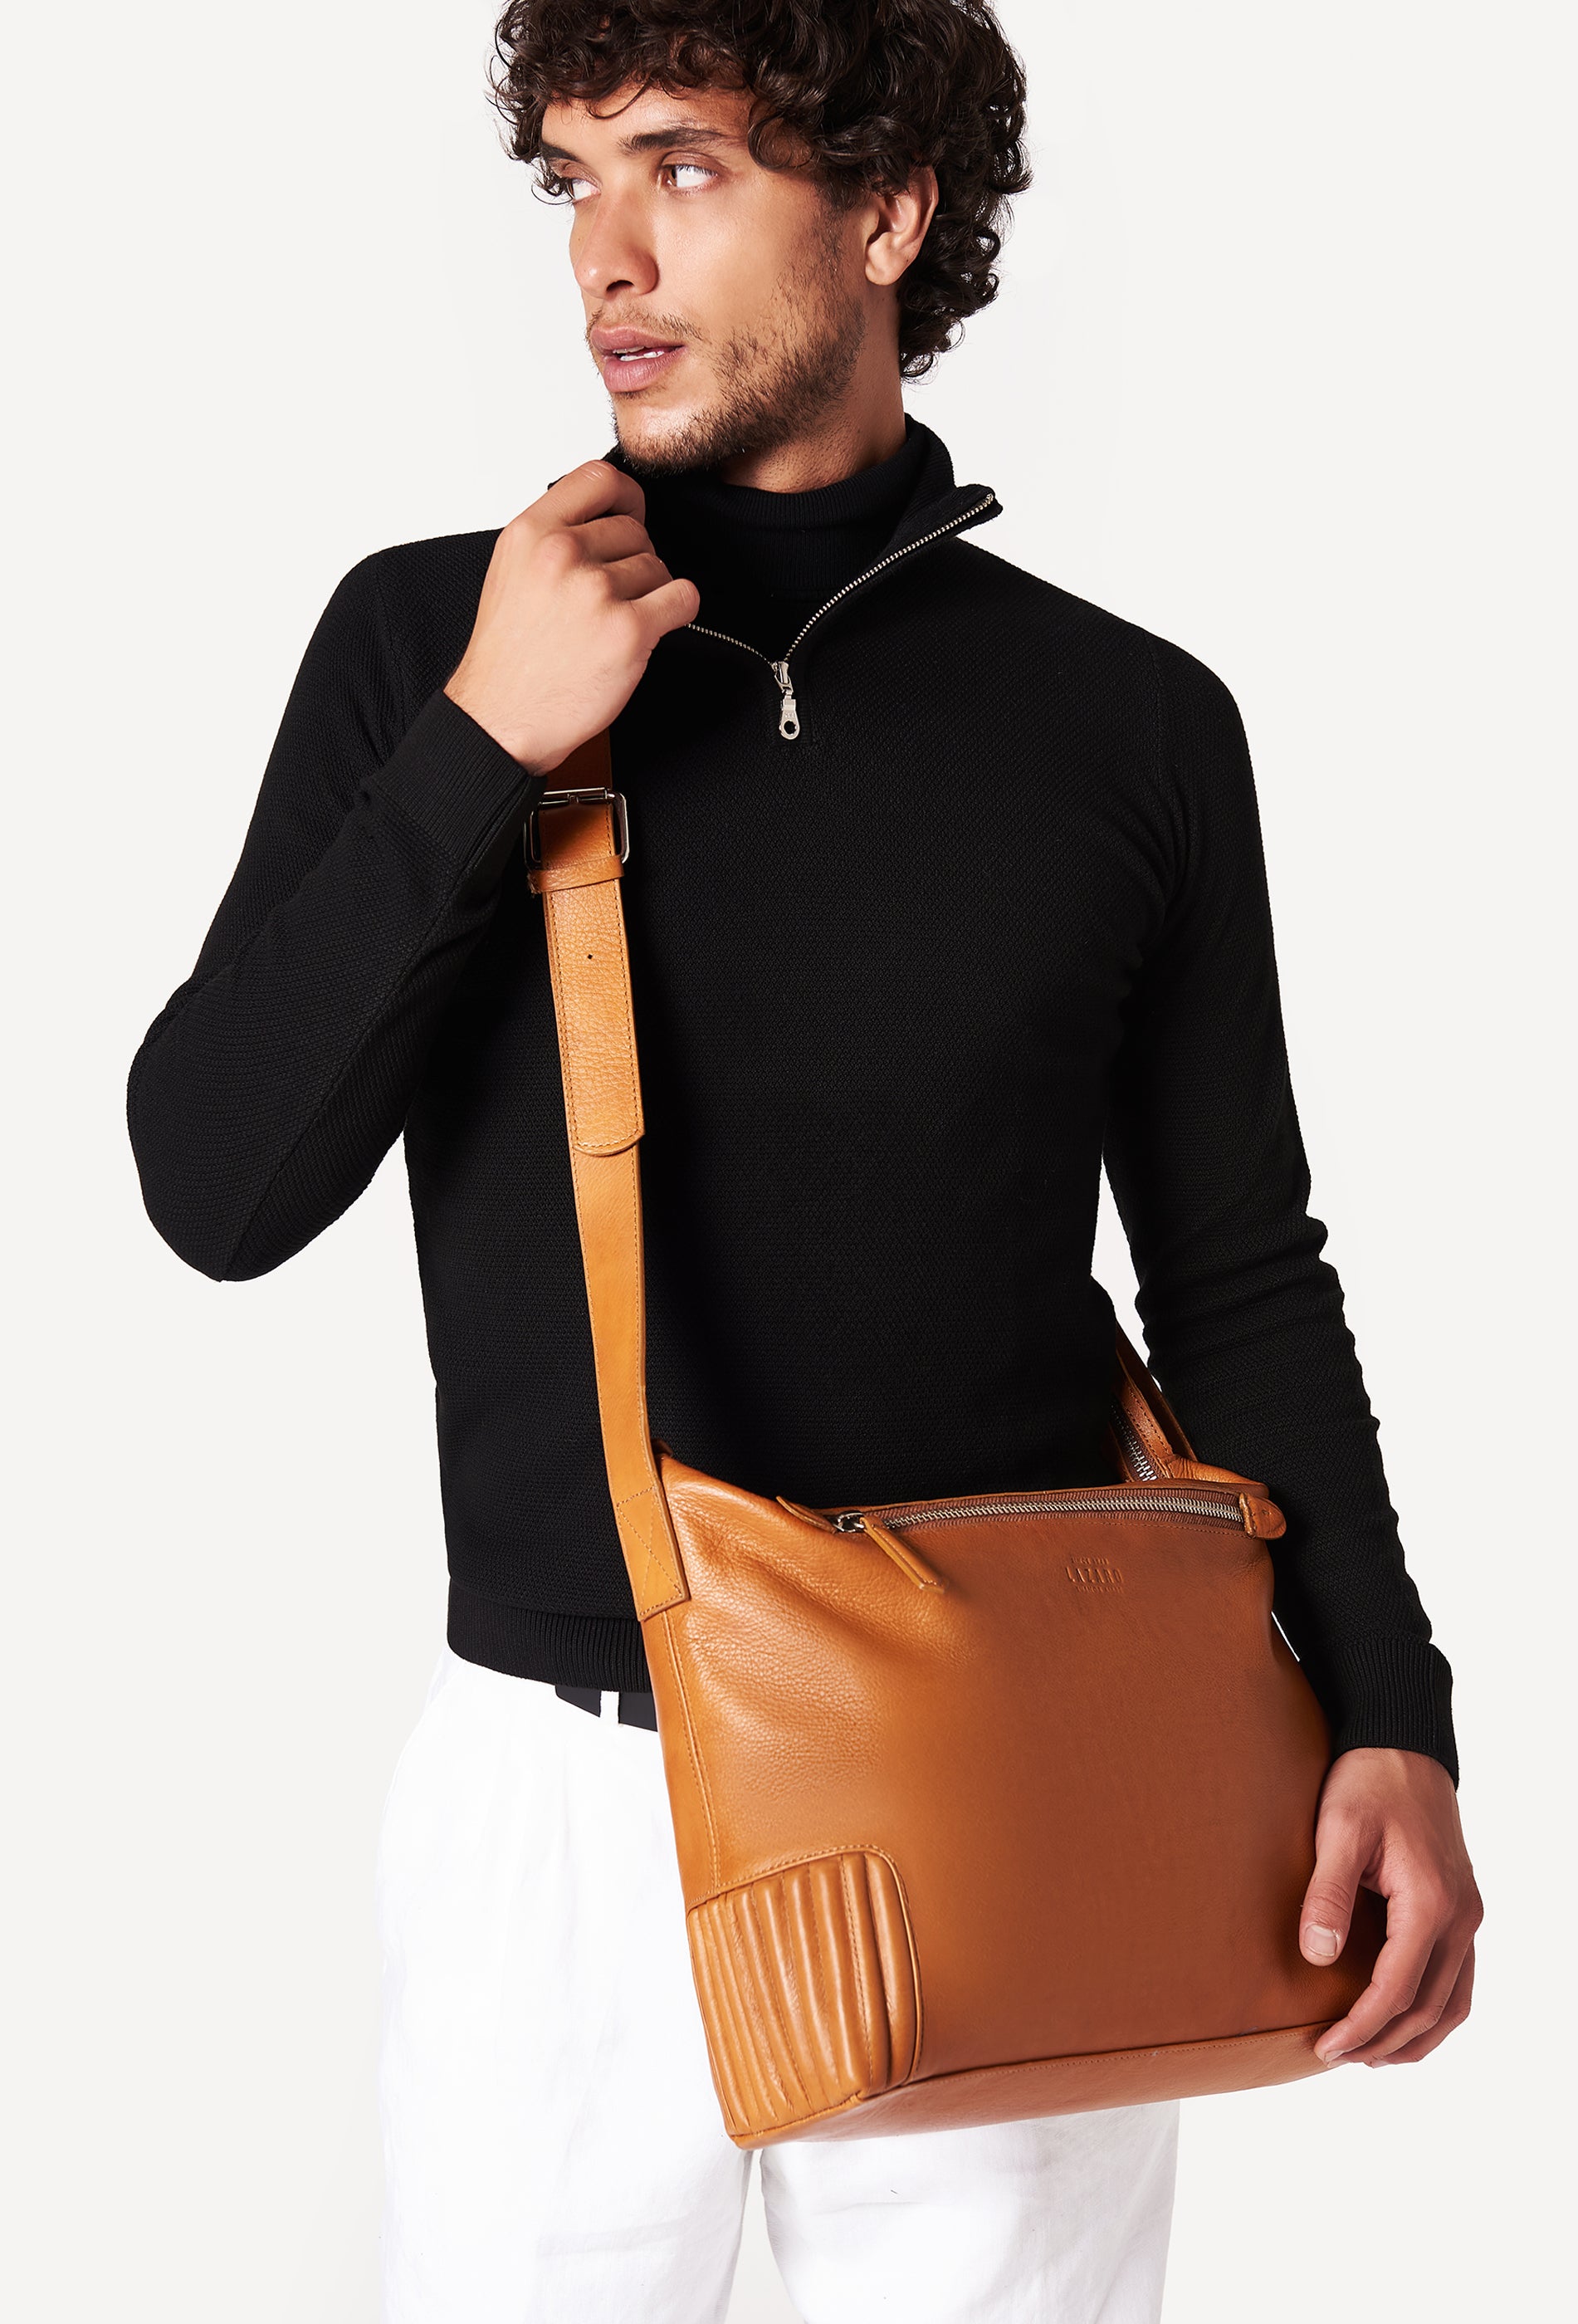 A model carries a sophisticated tan leather crossbody messenger, showcasing its sophisticated design. The bag features unique needlework on its side, adding to its elegant appeal. The model confidently displays the bag's size and craftsmanship while exuding a sense of style and elegance.